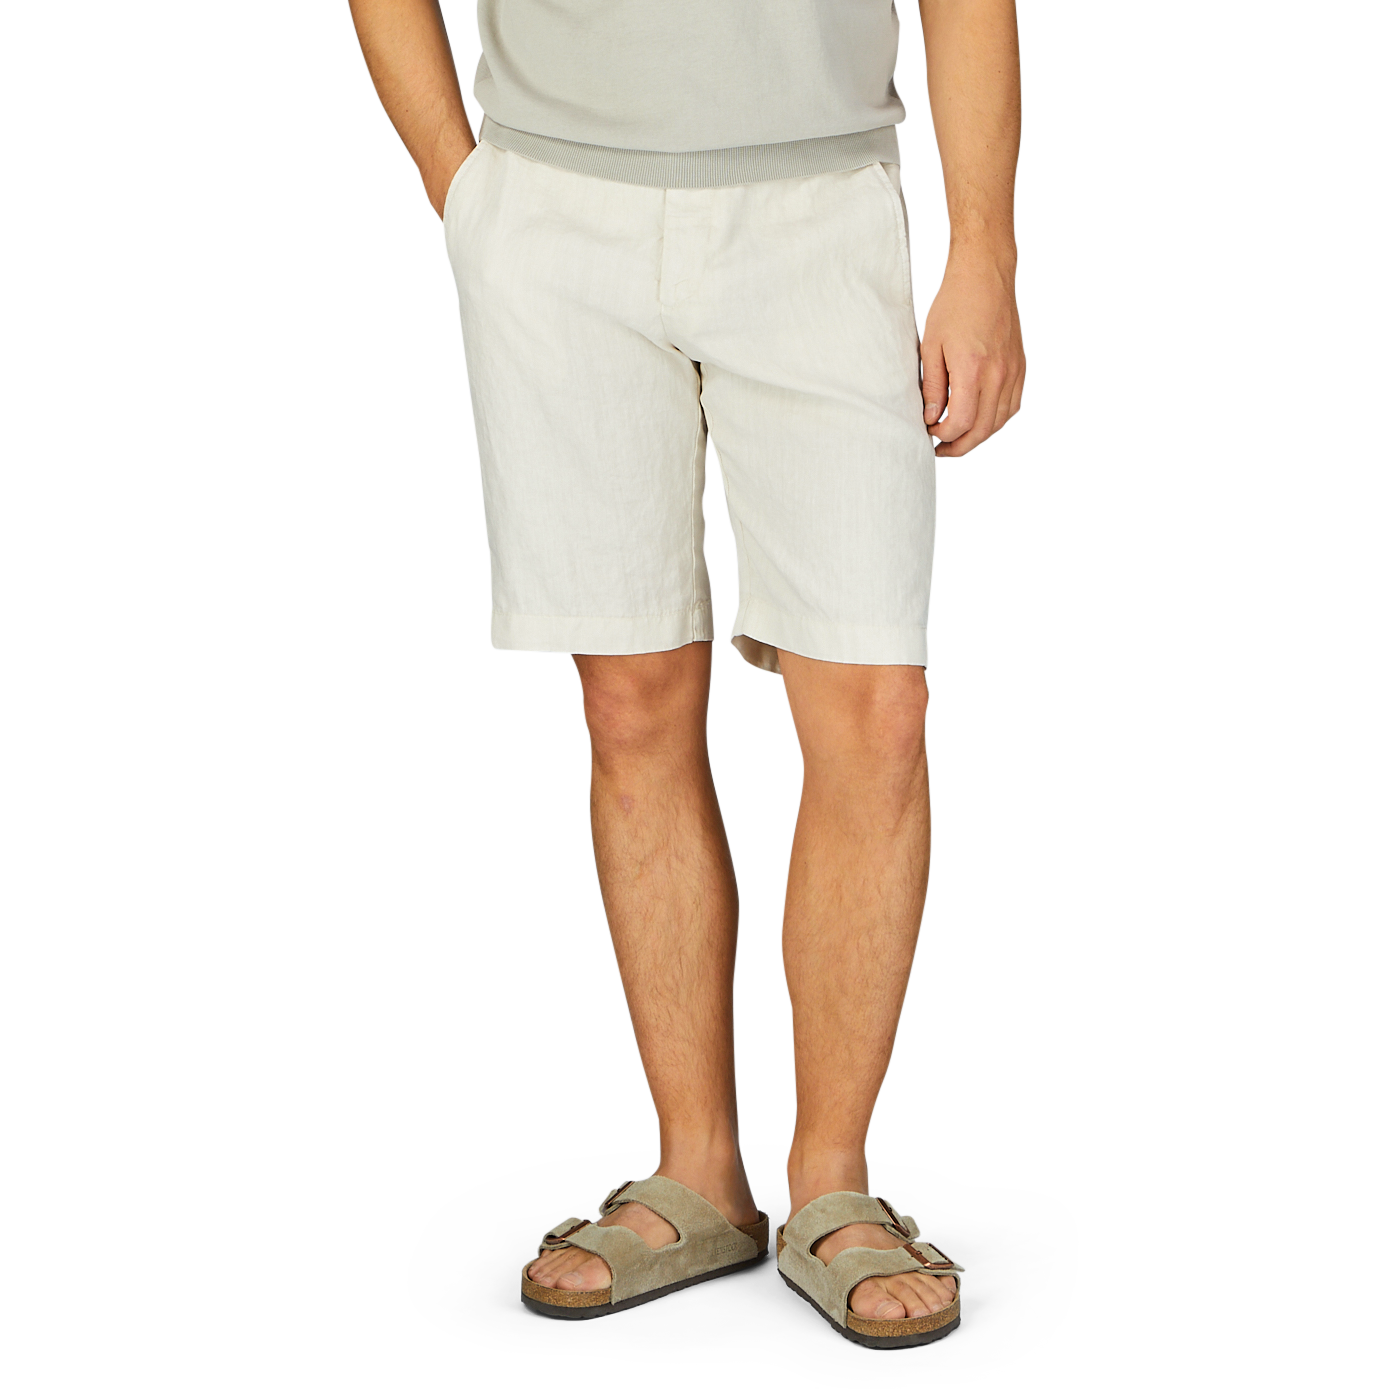 Man standing in a neutral pose wearing Berwich cream beige washed linen drawstring shorts and sandals against a gray background.